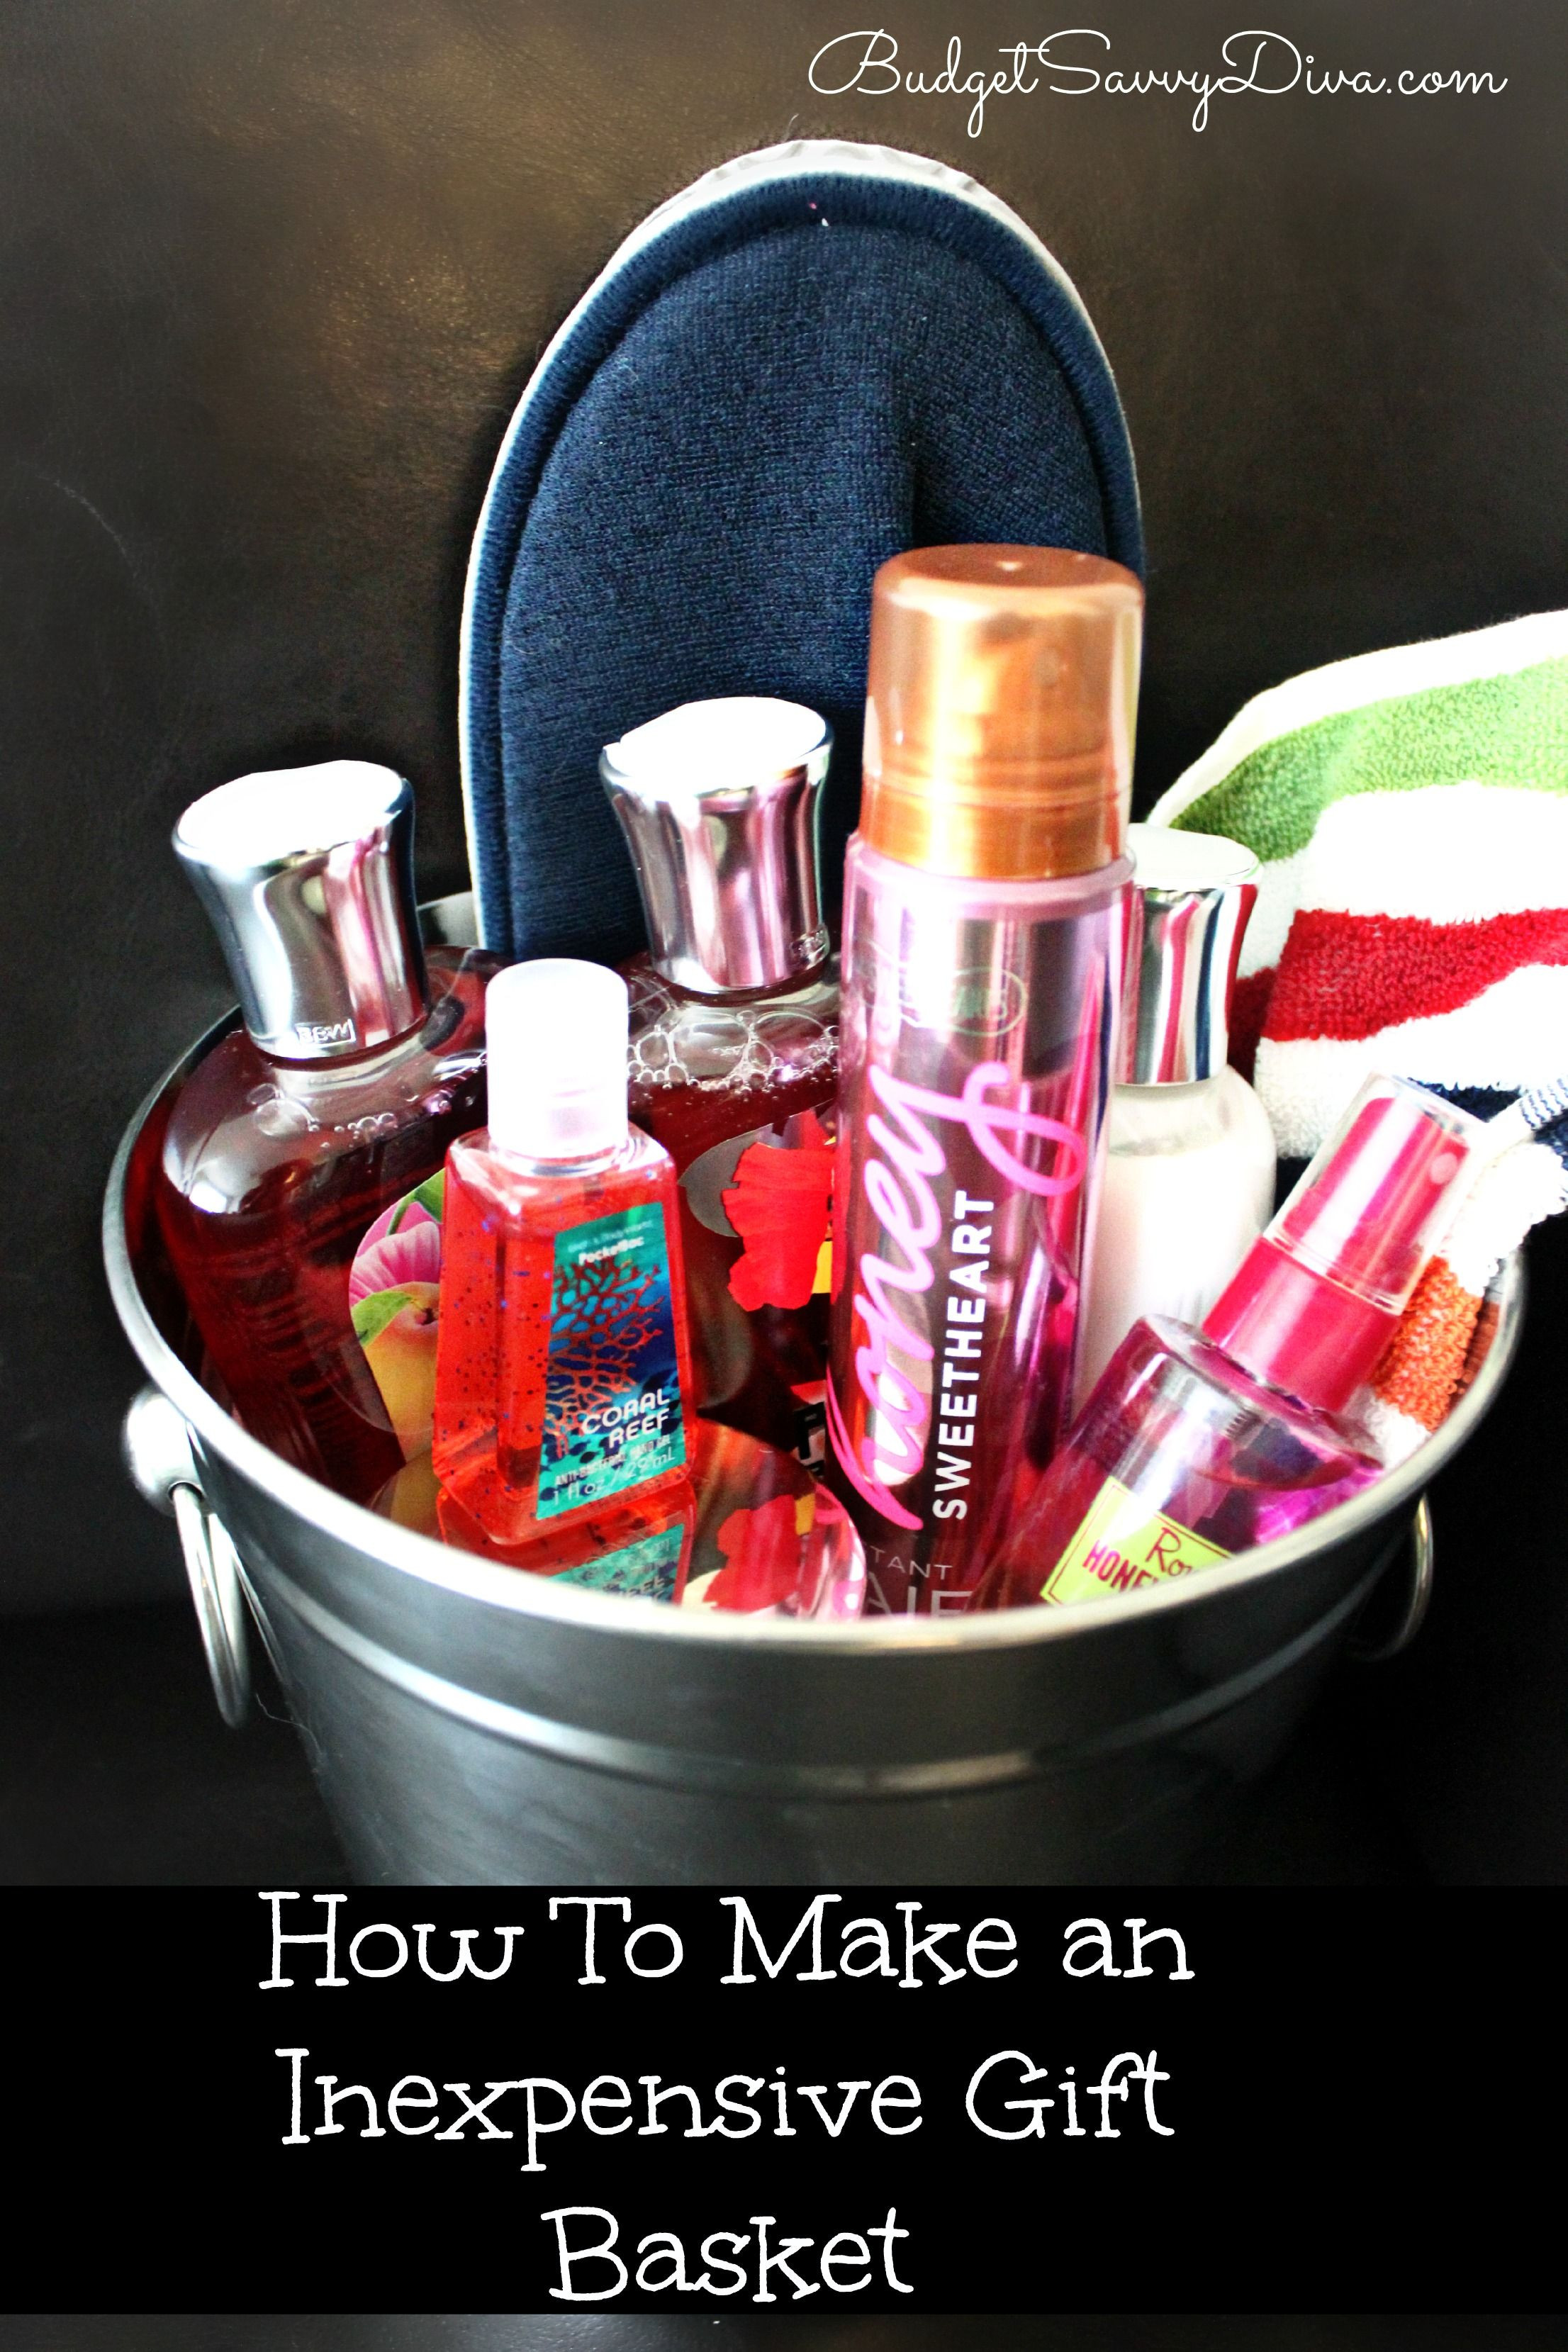 Make Up Gift Basket Ideas
 How to Make an Inexpensive Gift Basket